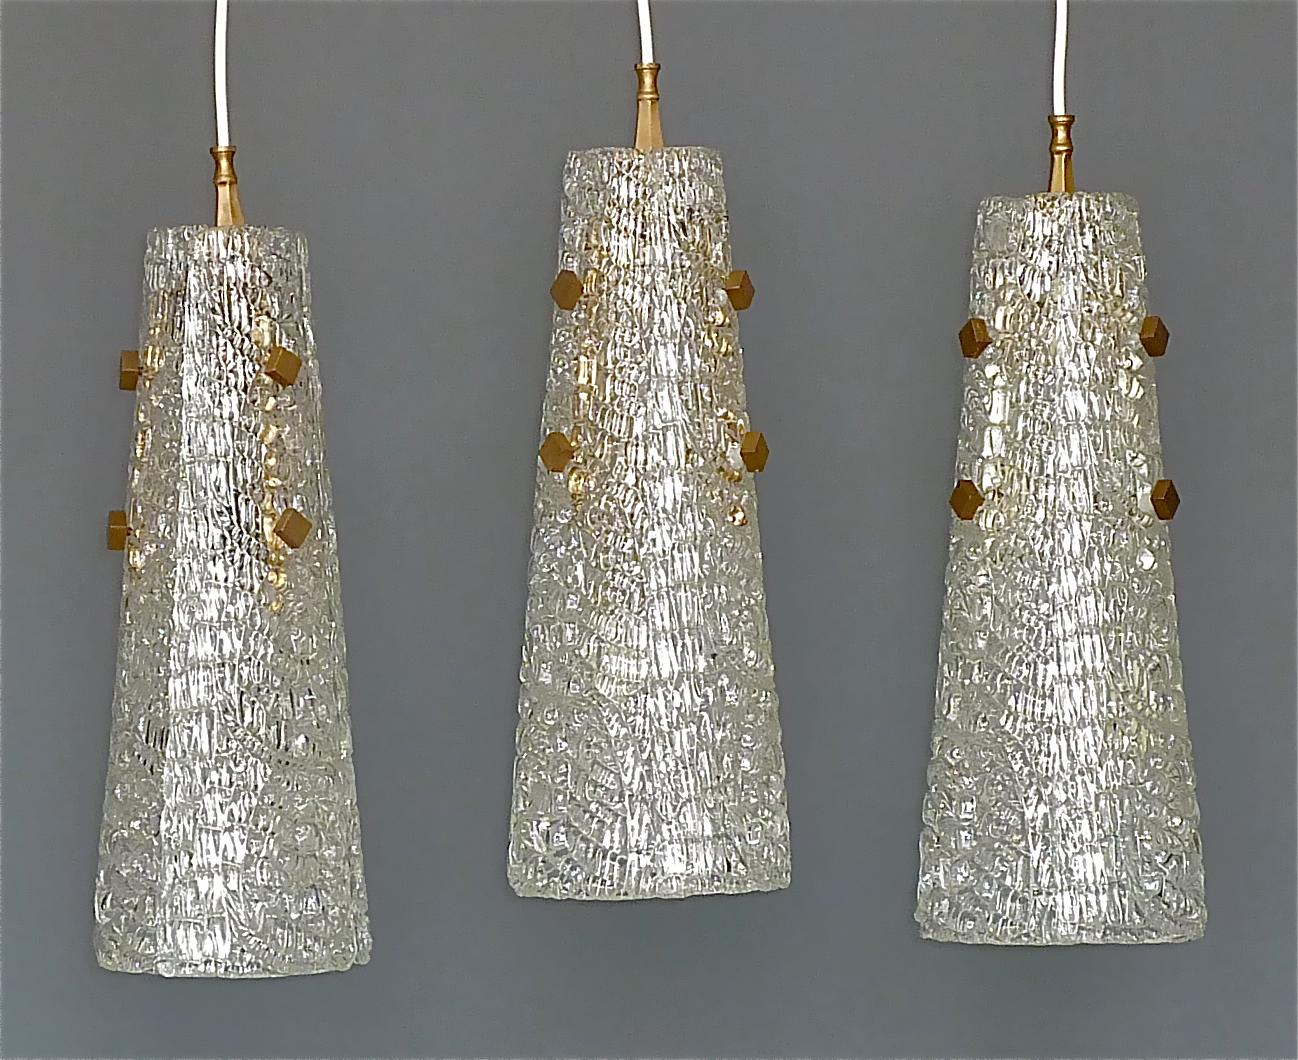 Rare and early set of three Paolo Venini midcentury pendant lamps of slightly iridescent and textured Murano ice glass, Italy circa 1950s. The large lights are made of three glass petals forming a cone shade and beautiful patinated brass details.